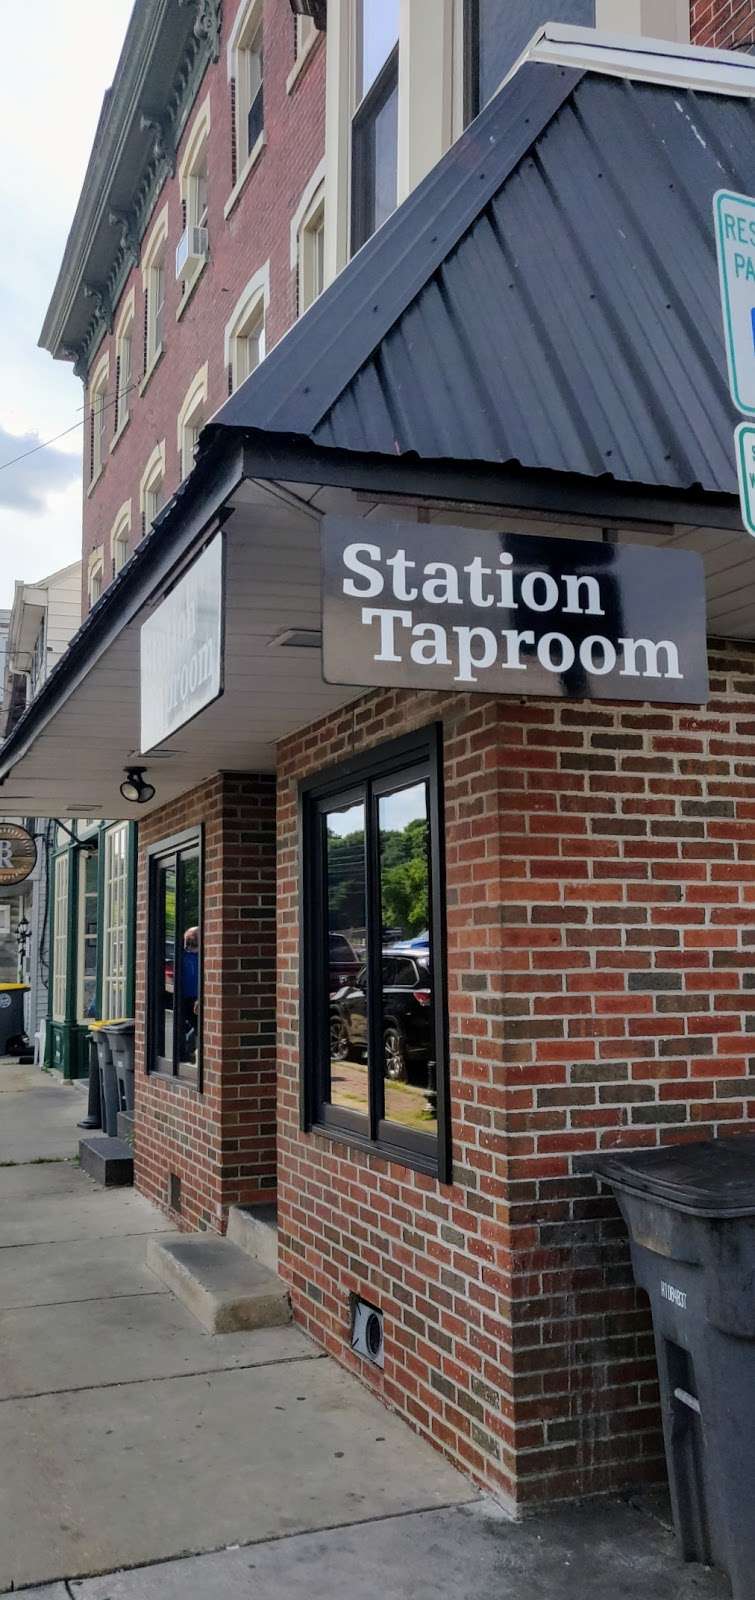 Station Taproom | 207 W Lancaster Ave, Downingtown, PA 19335 | Phone: (484) 593-0560